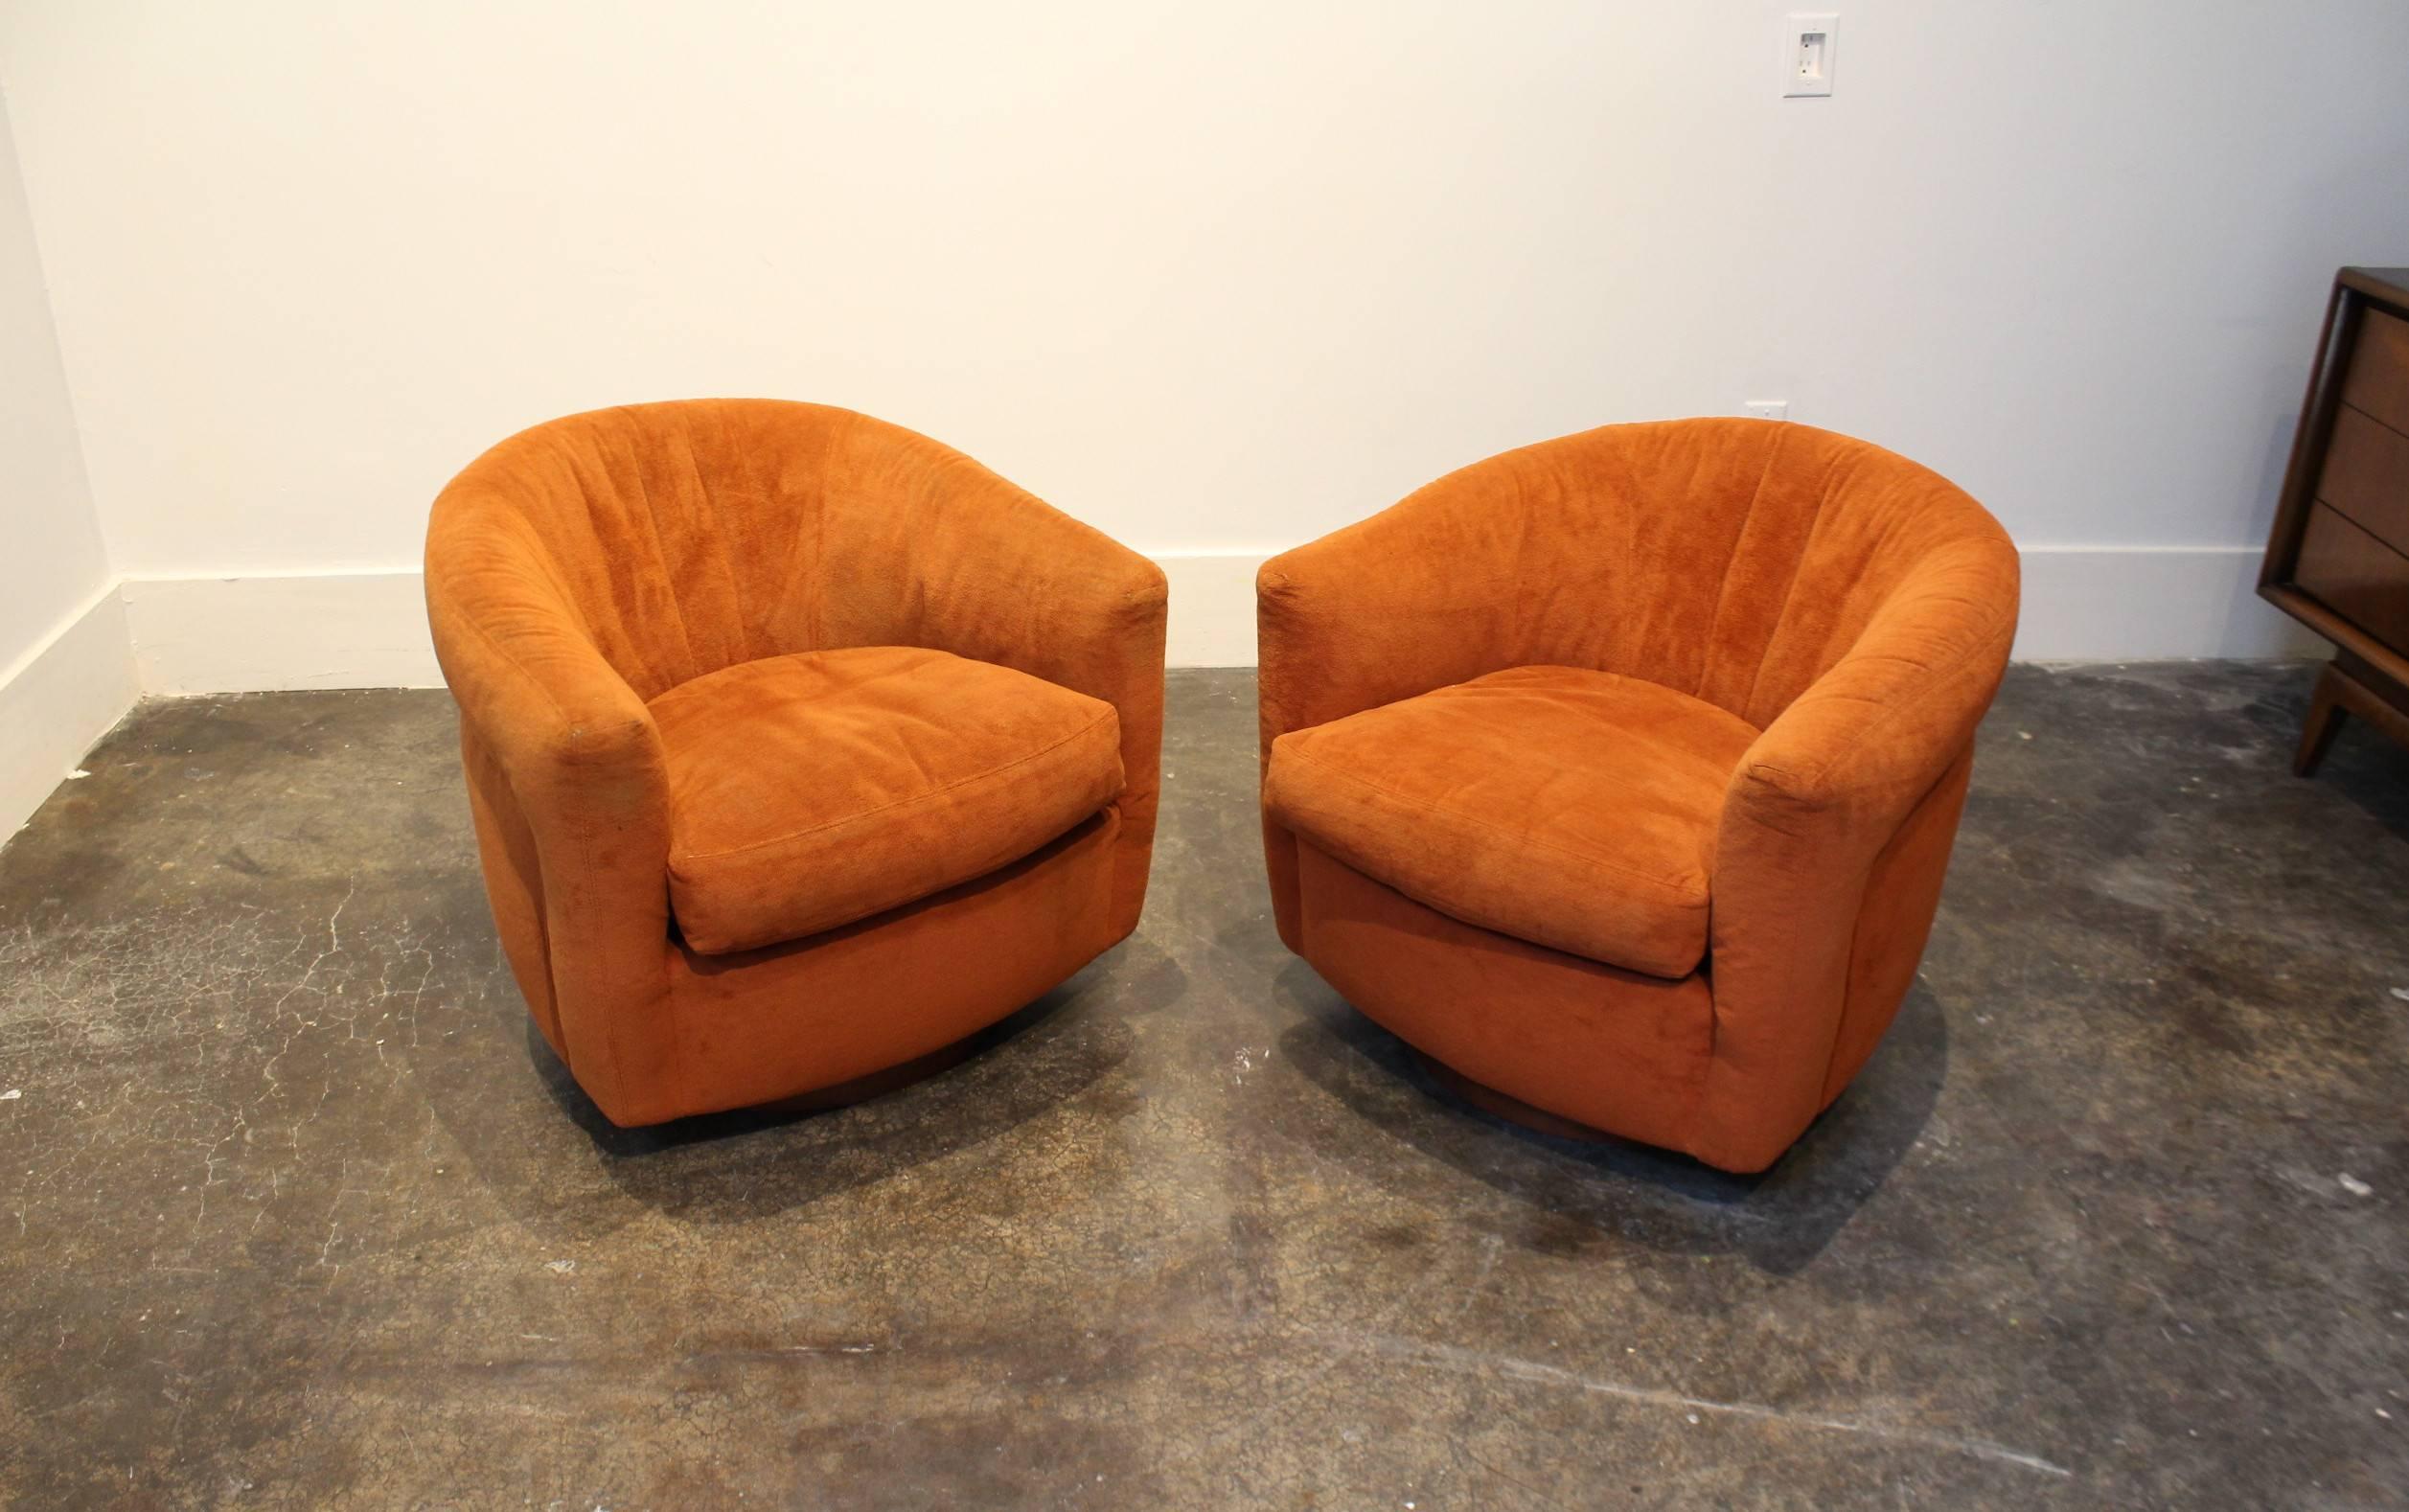 Pair of Milo Baughman for Thayer Coggin swivel and tilt tub chairs from the 1970s with original tags and upholstery. Tapered tub shape upholstered in rust orange fabric on circular walnut wood base.